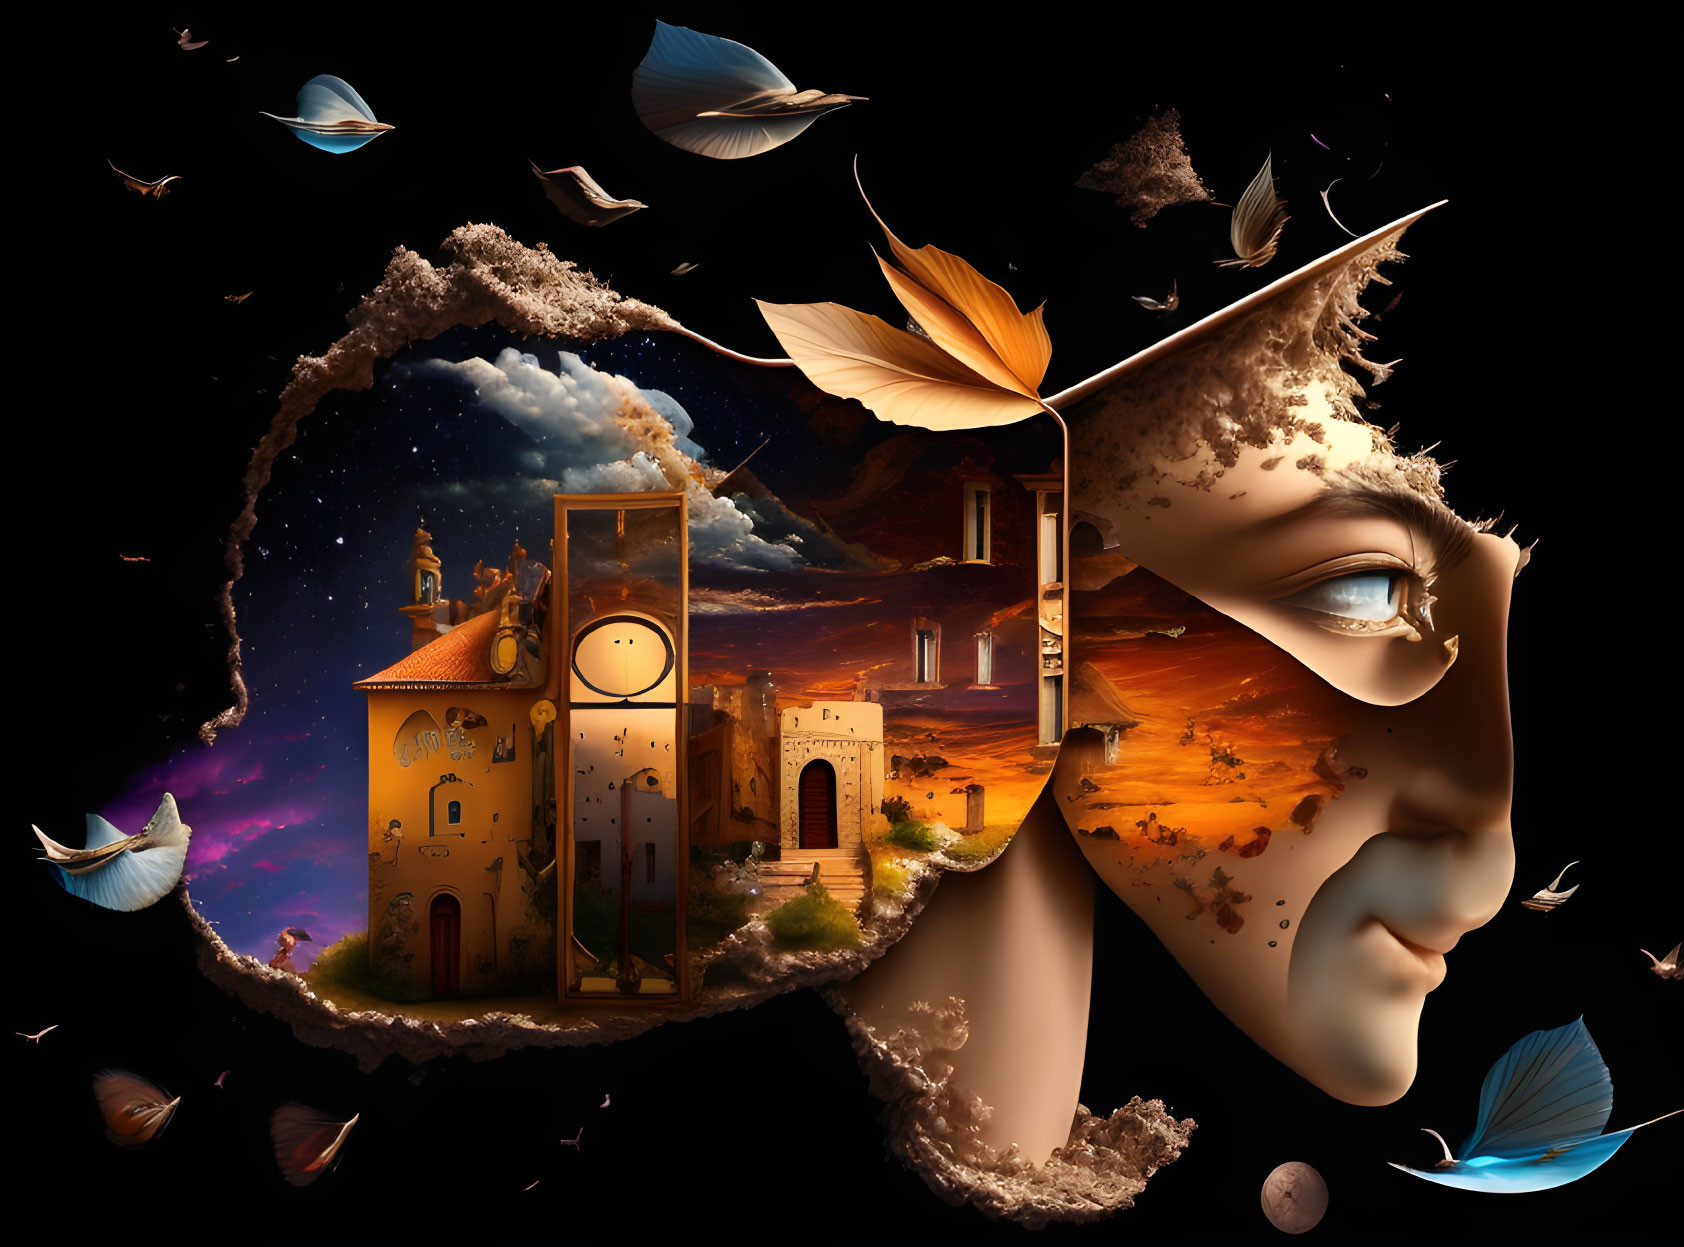 Fragmented face with clock tower, buildings, cosmos, feathers, and leaves on dark background